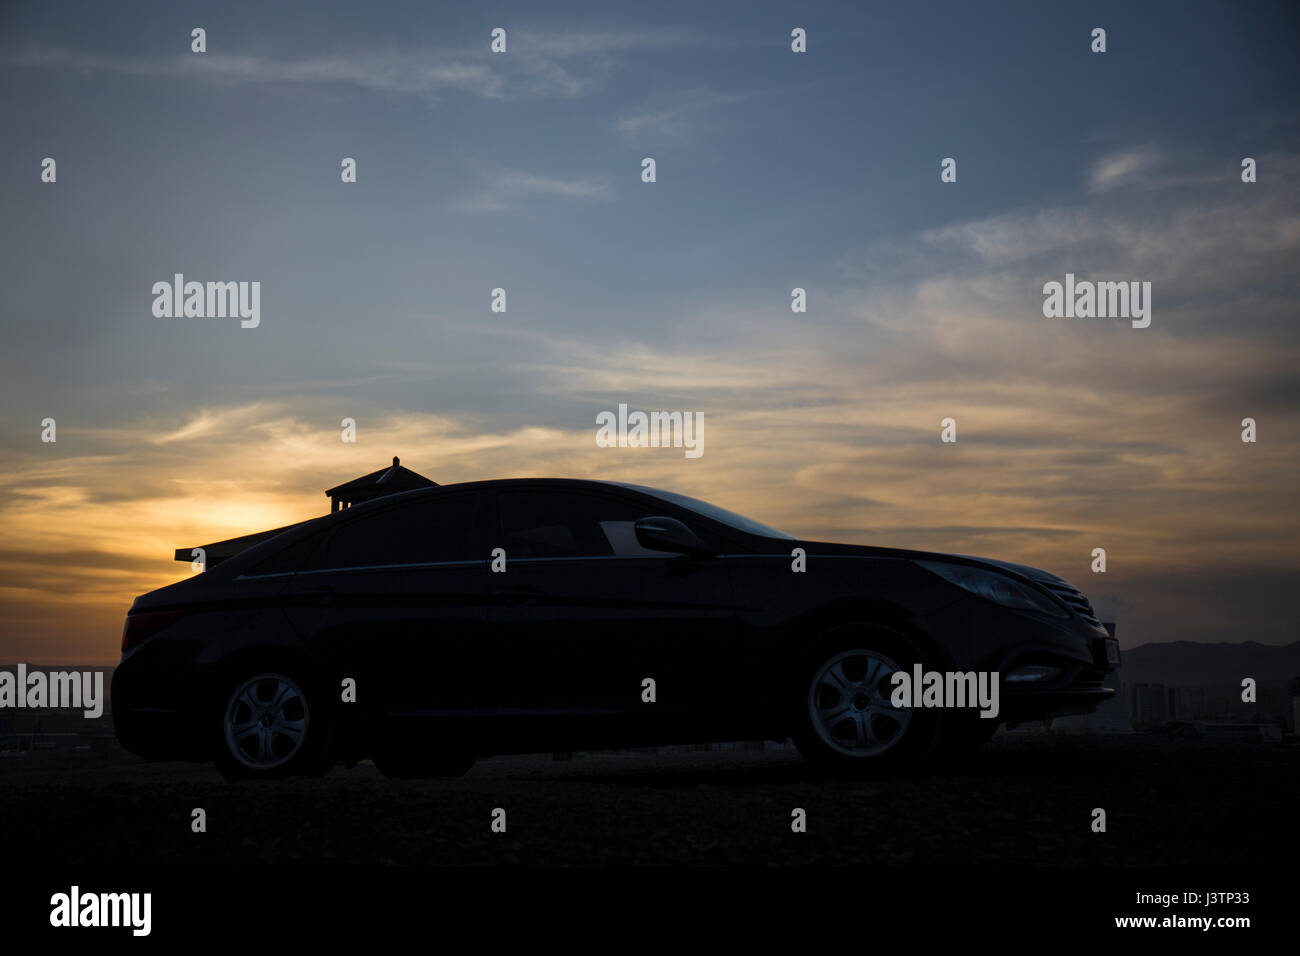 A luxury black car has just been touched by a beautiful sunset. Lookout at Ulan Bator Stock Photo